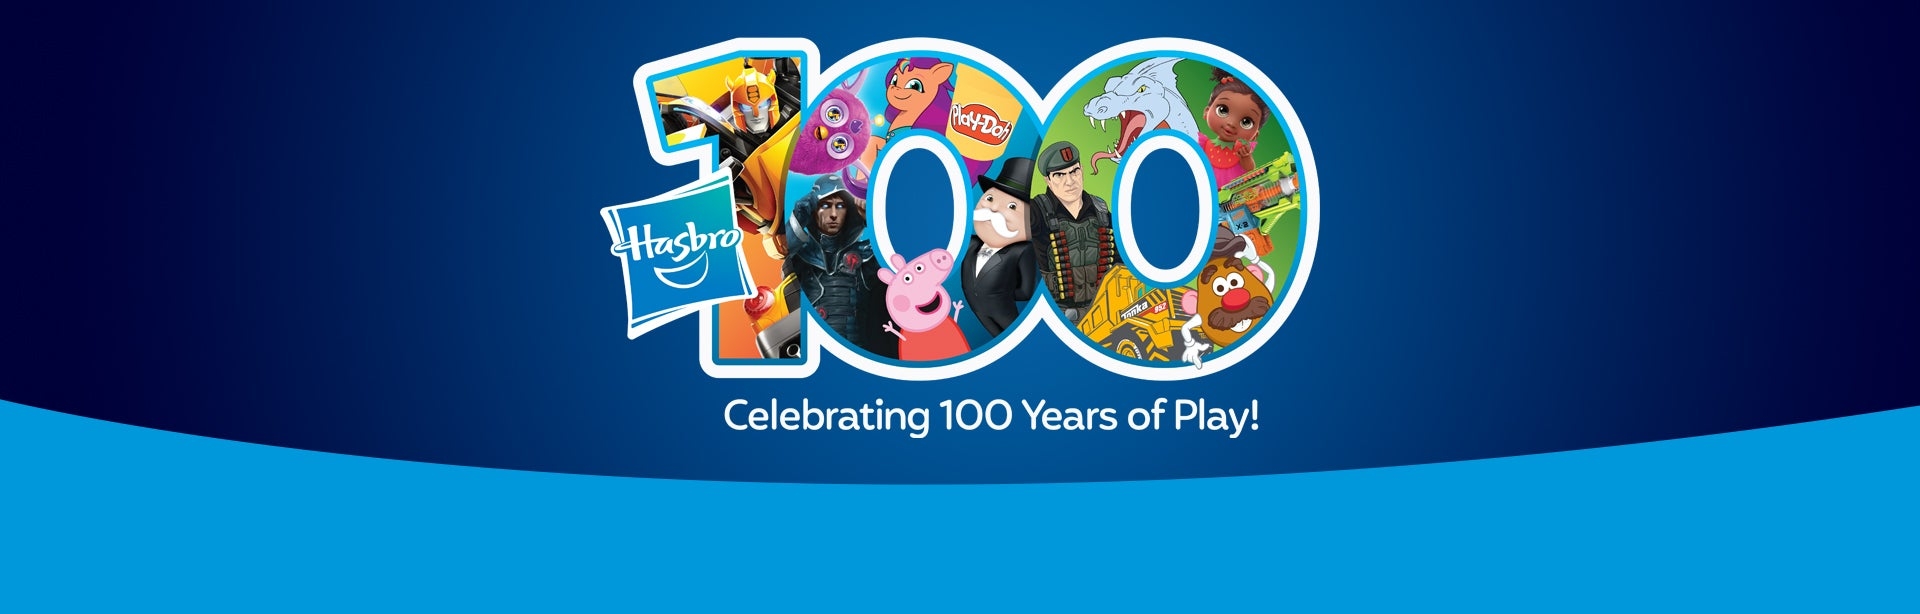 Celebrating 100 Years of Play!